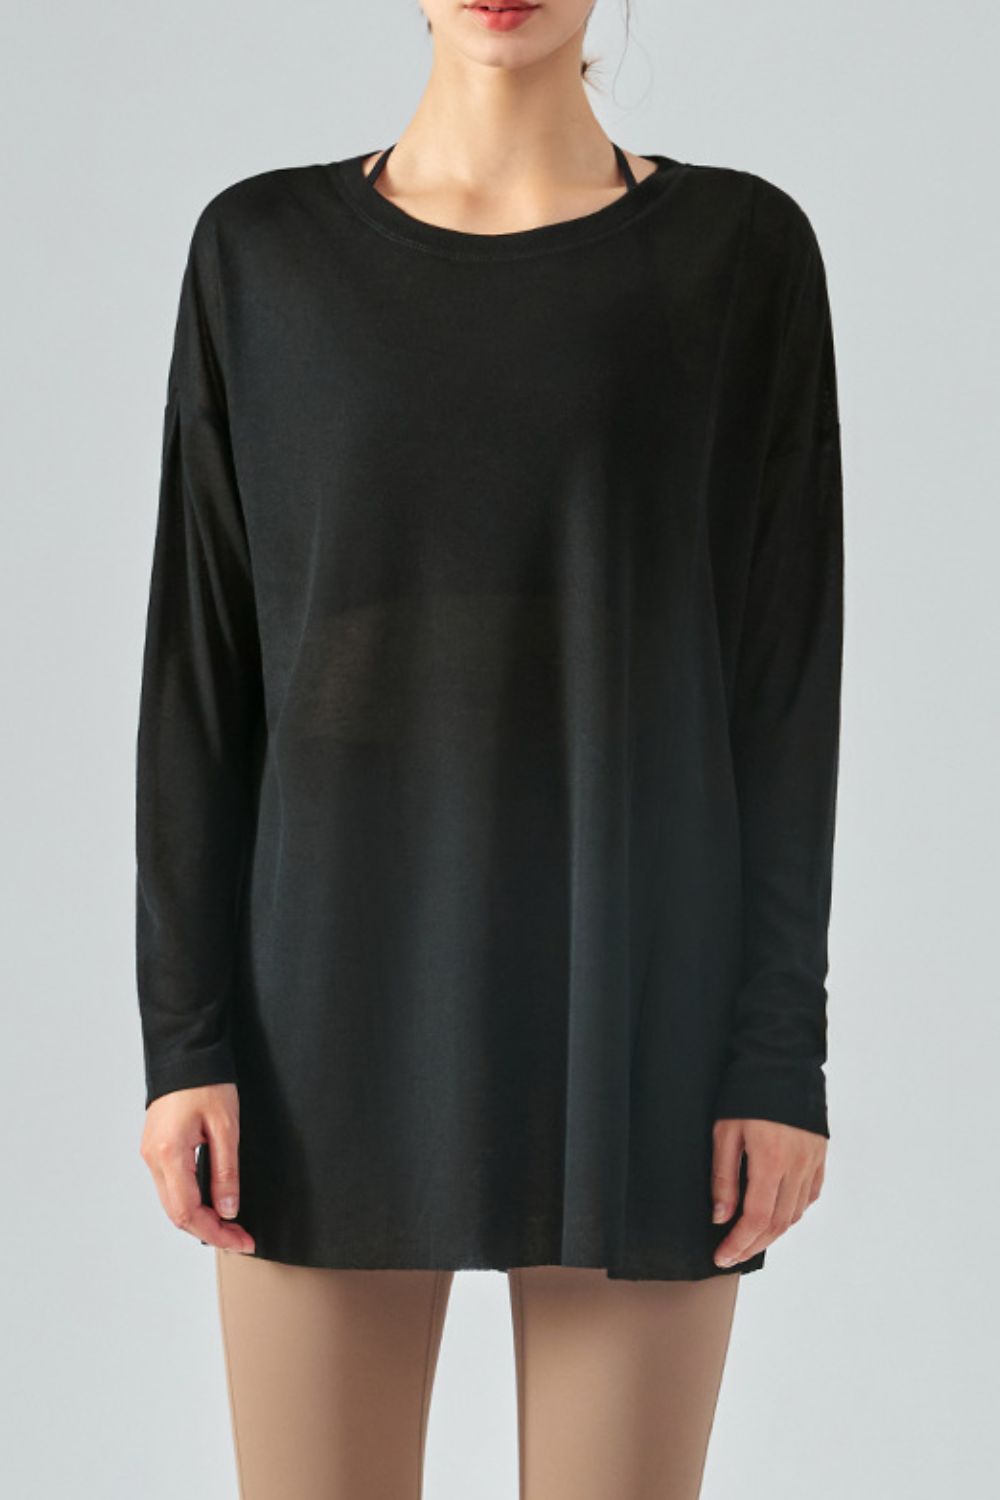 Round Neck Slit Sheer Tunic Sports Top